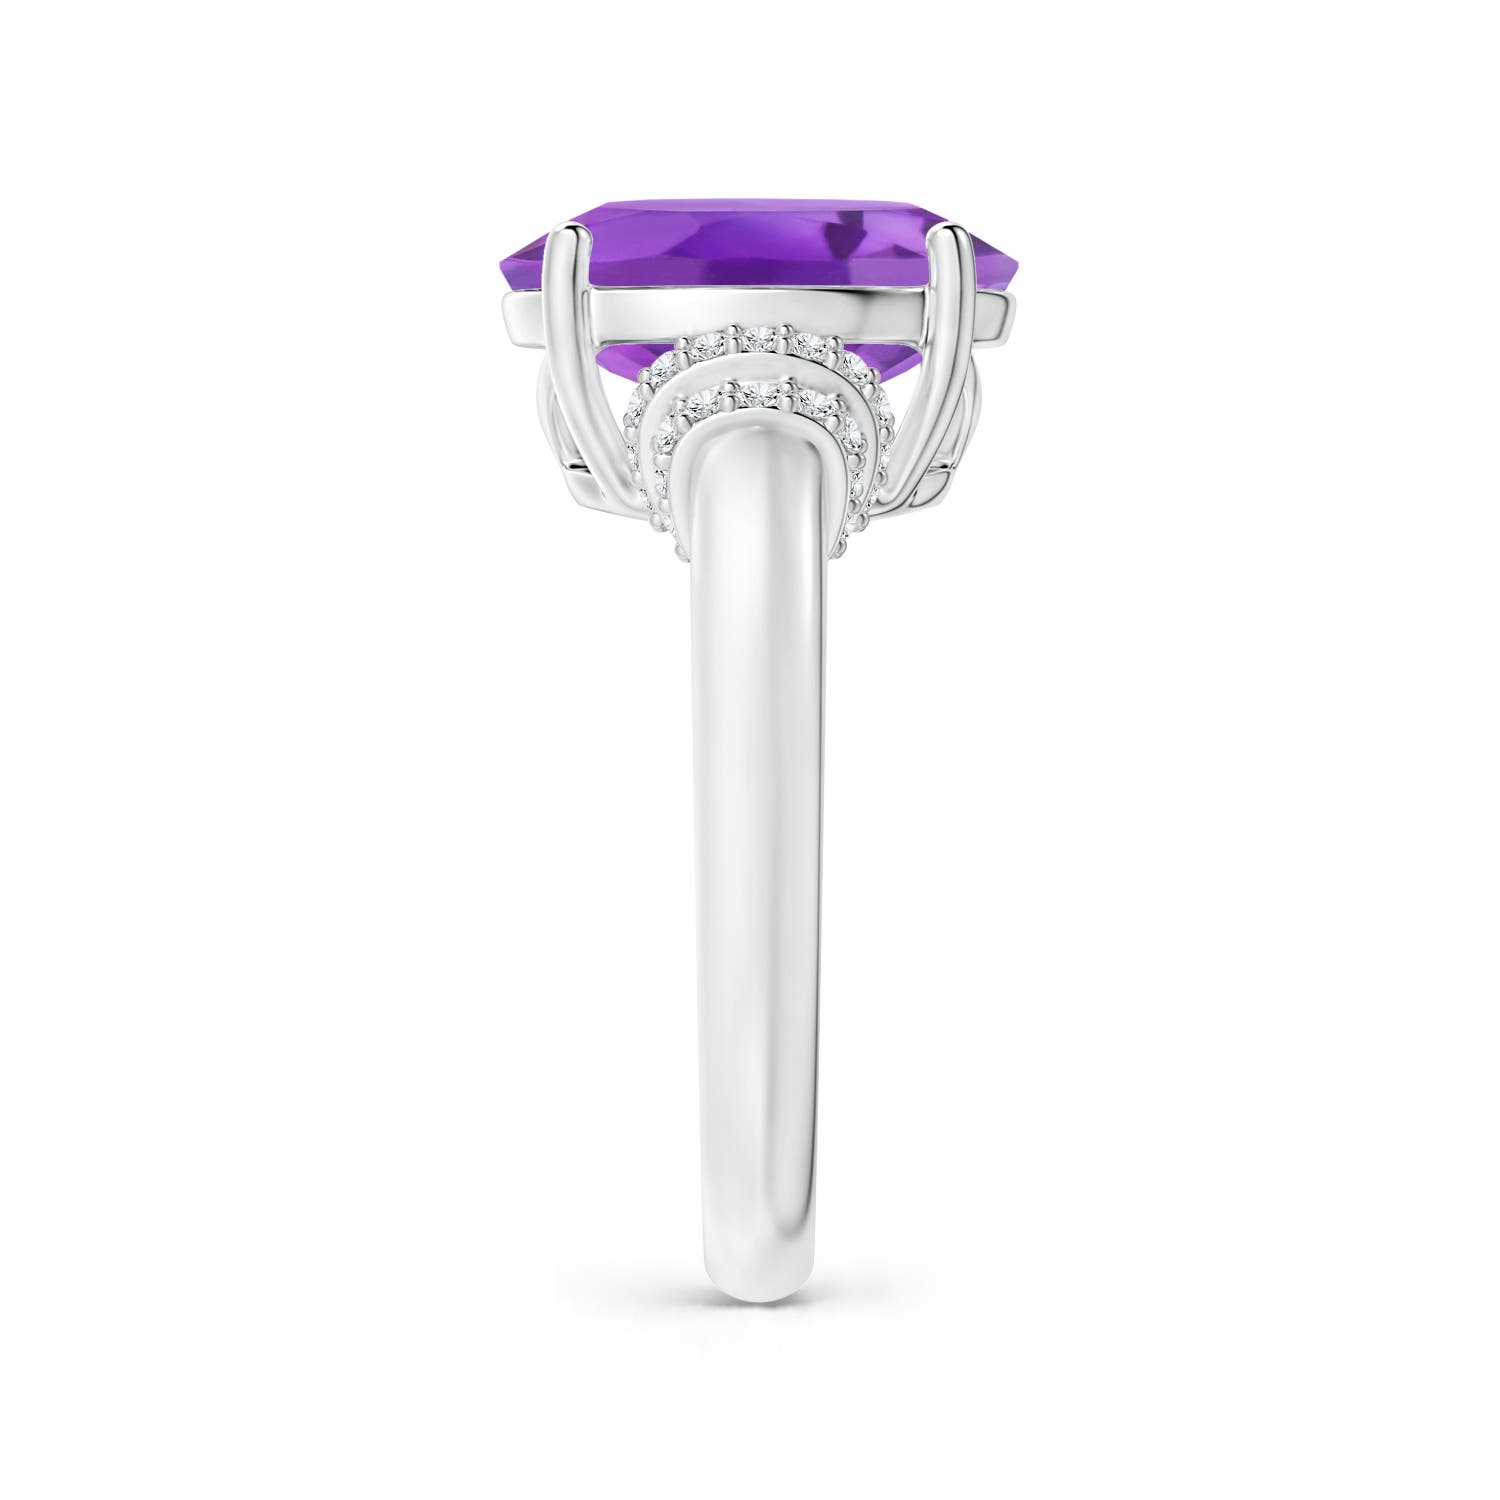 AA - Amethyst / 4.54 CT / 14 KT White Gold